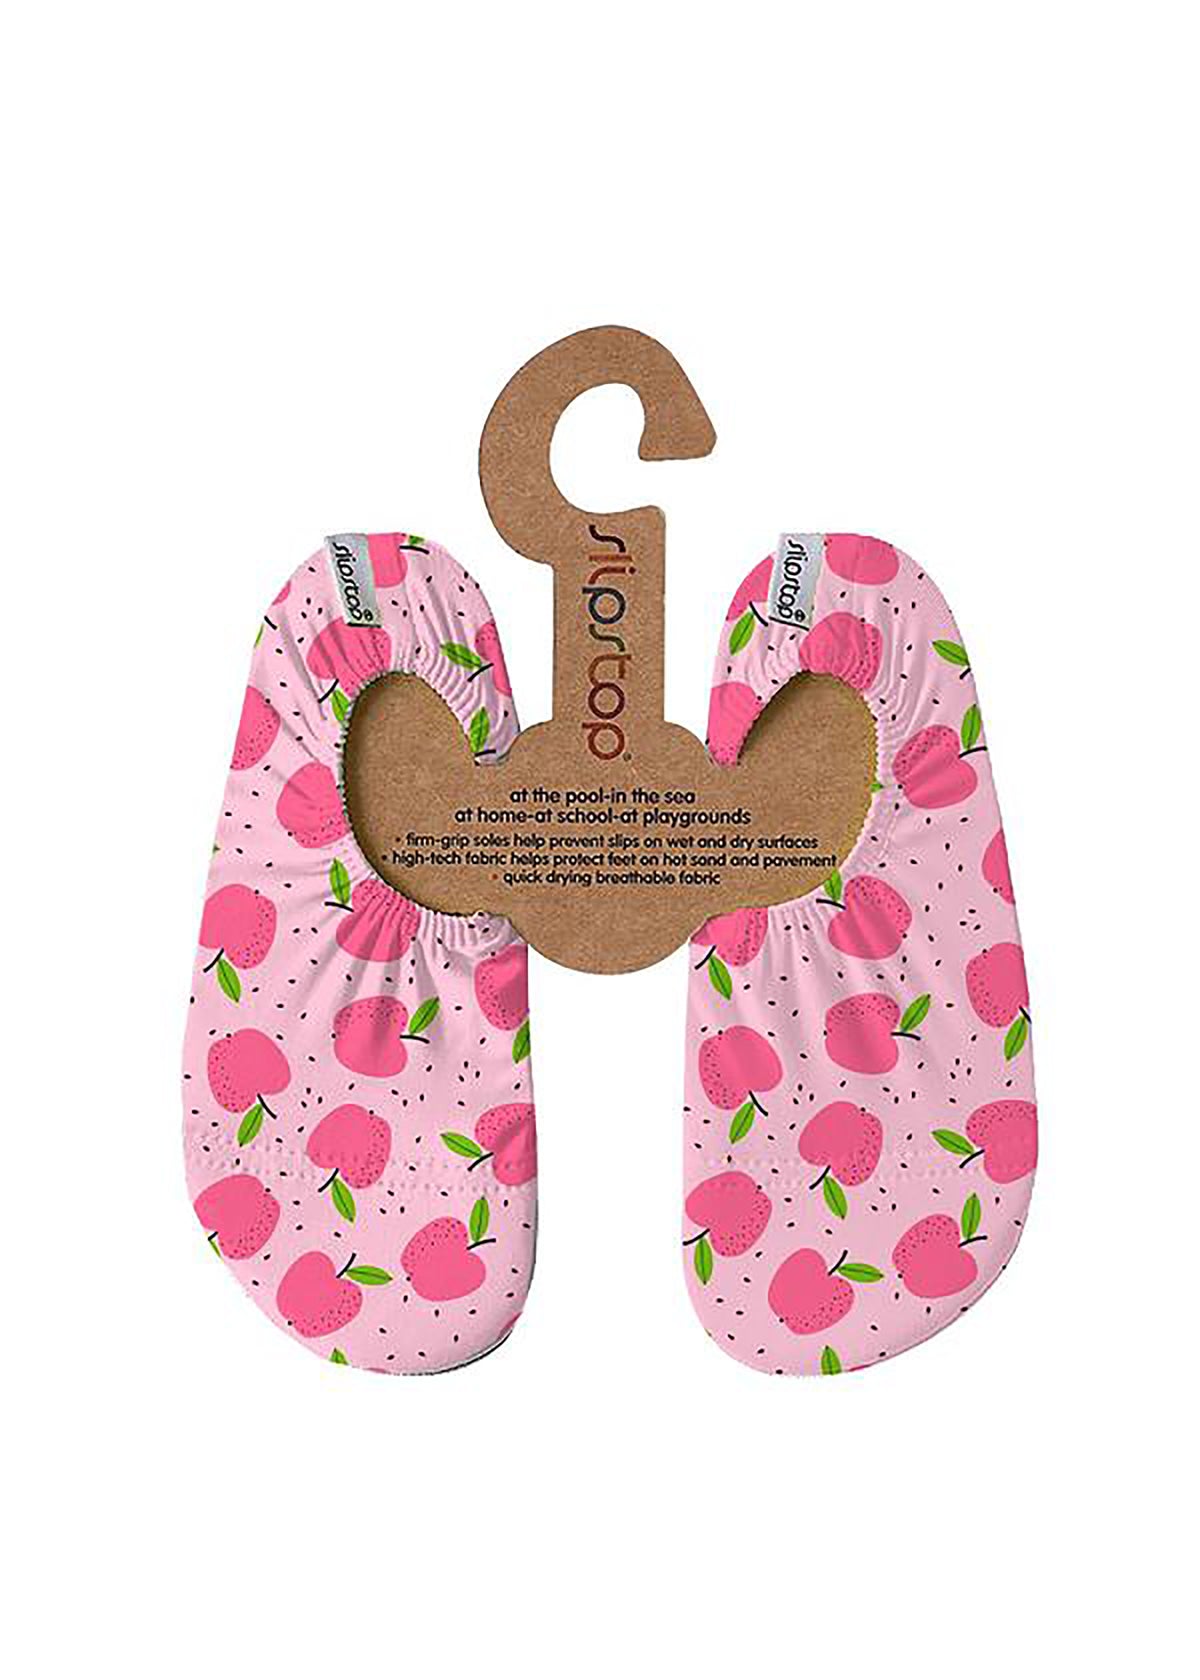 Children's slippers - Paddle, apple, pink